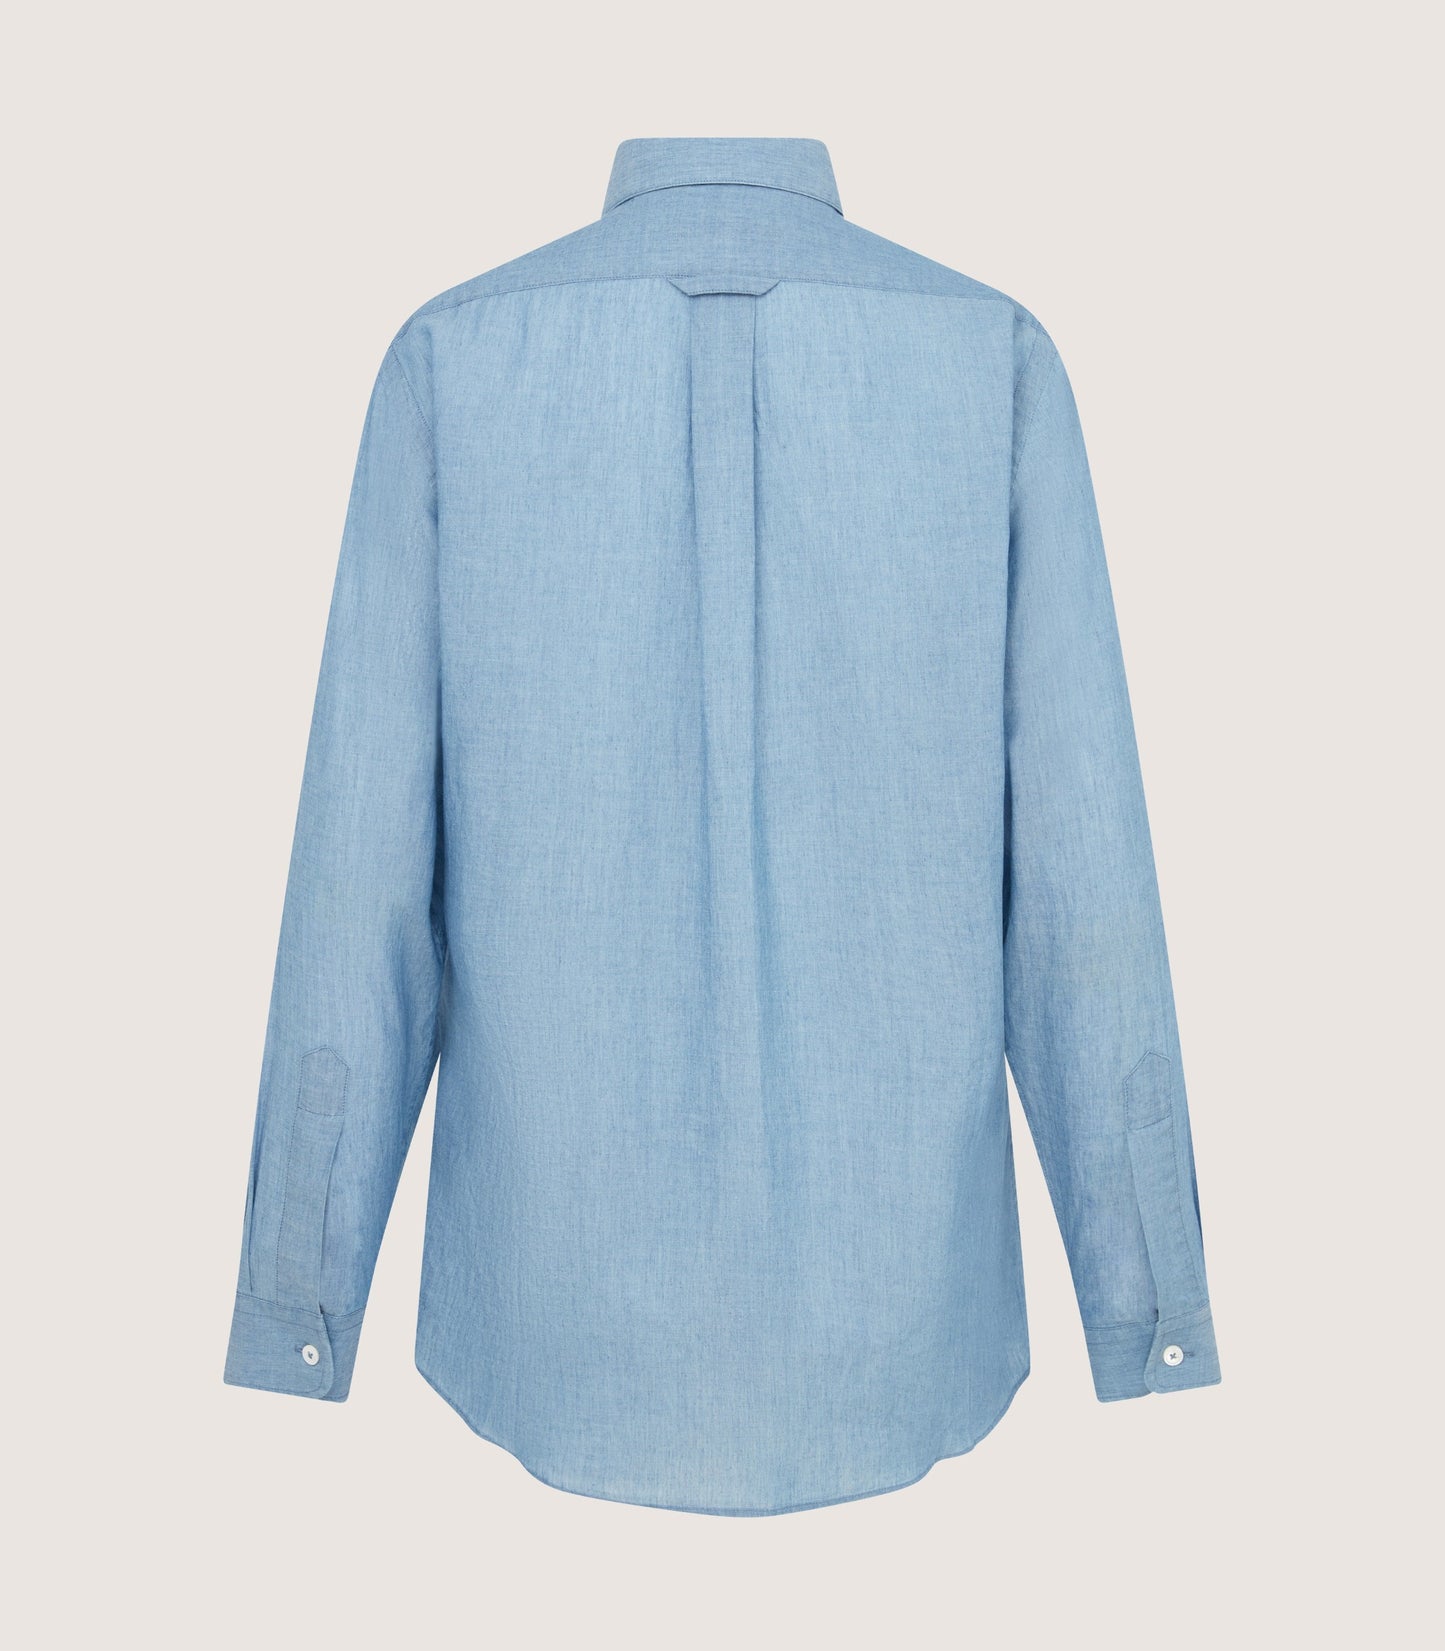 Women's Japanese Chambray Button Down Shirt In Washed Indigo